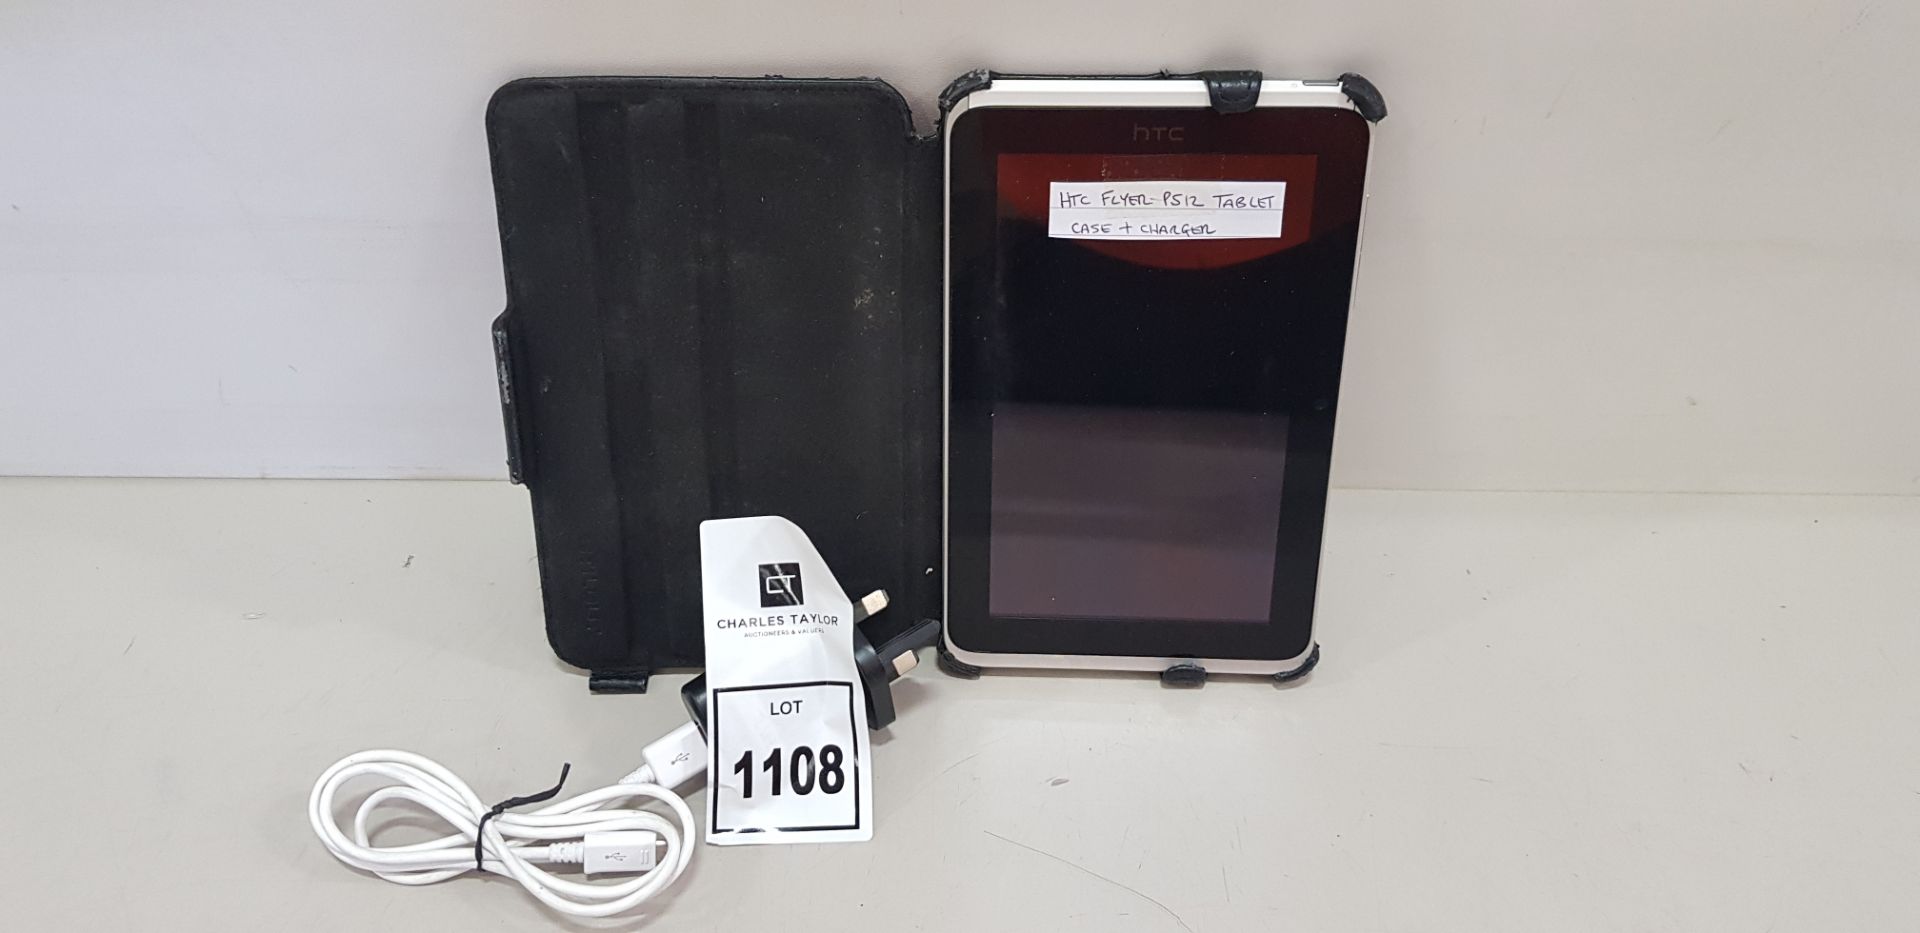 HTC FLYER P512 TABLET CASE + CHARGER